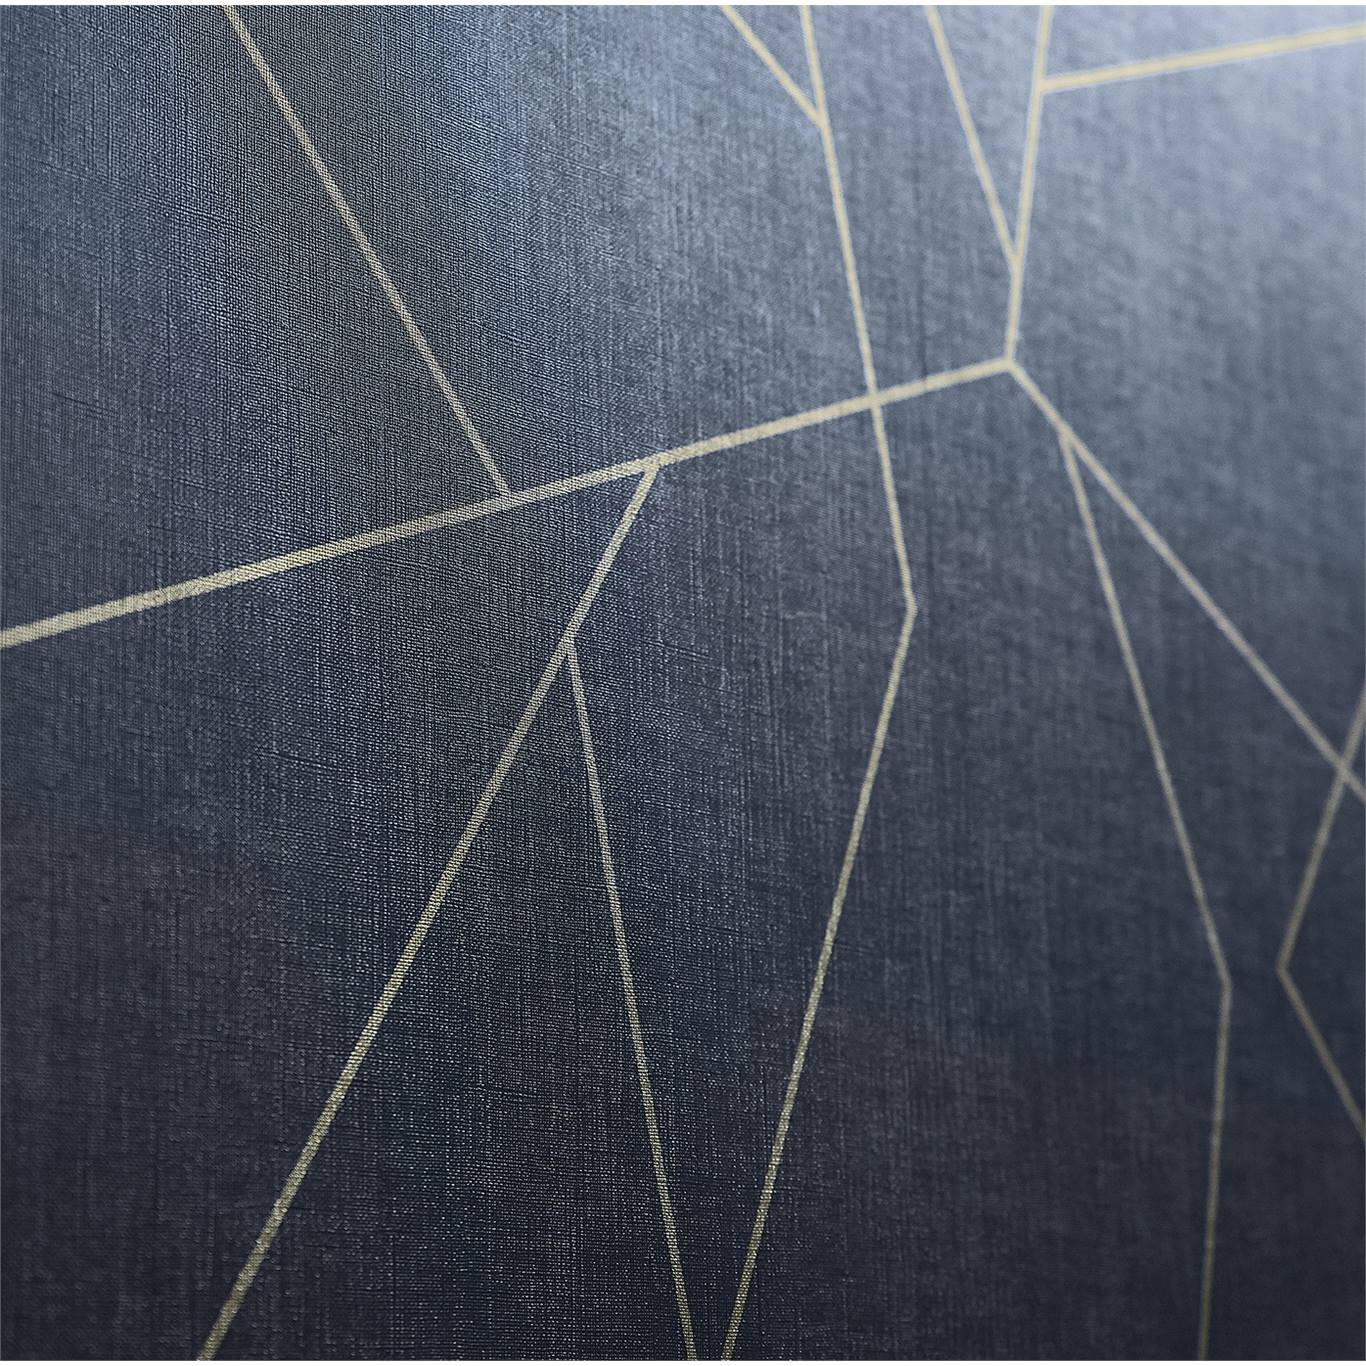 Parapet, A Wallpaper By Harlequin, Part Of The Textured - Floor - HD Wallpaper 